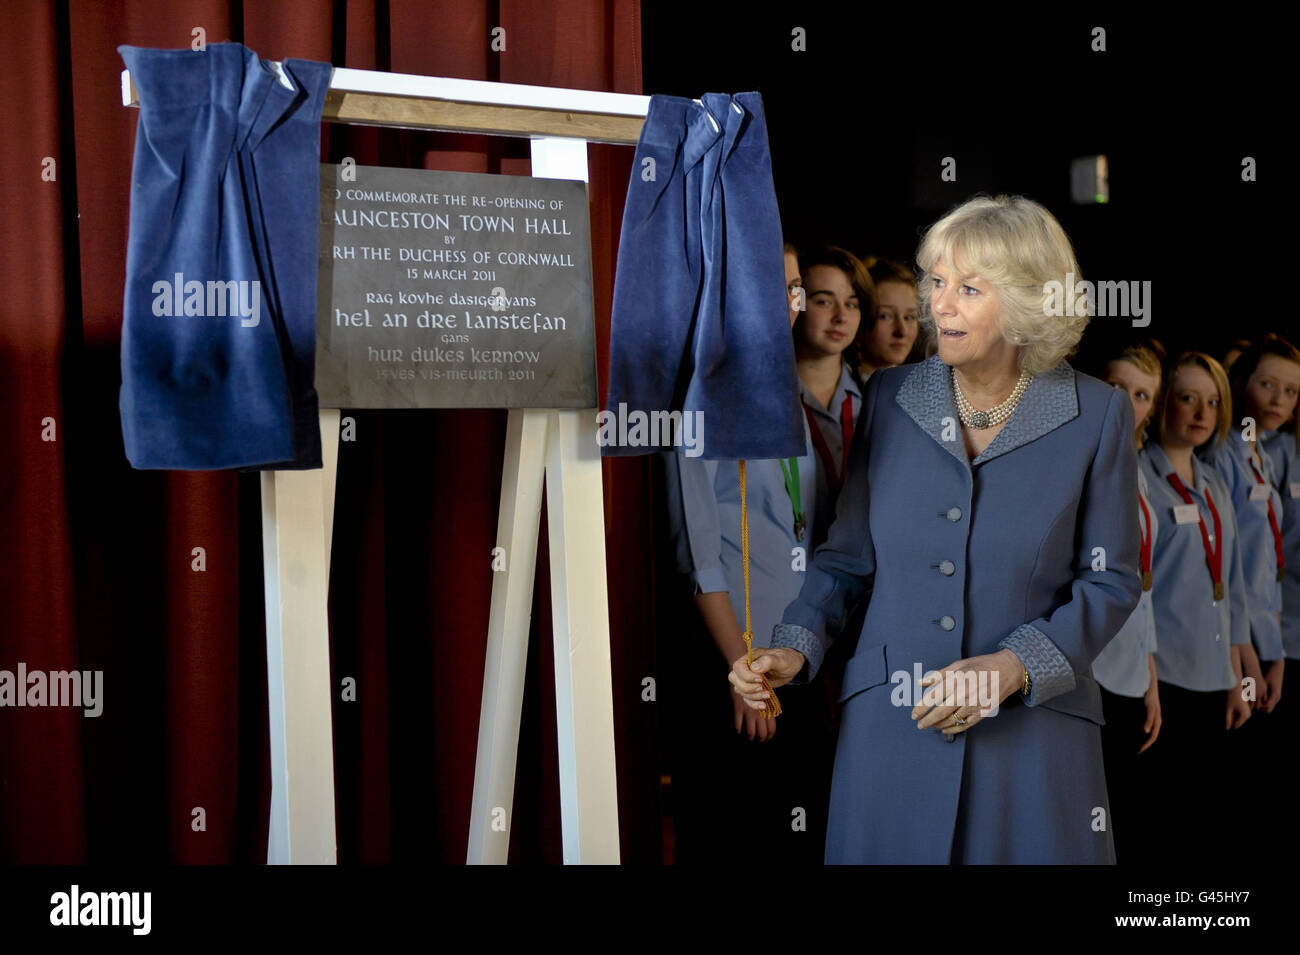 Duchess of Cornwall opens a vail to reveal a commemorative plaque towards the end of her tour during the re-opening of Launceston Town Hall, Cornwall. Stock Photo